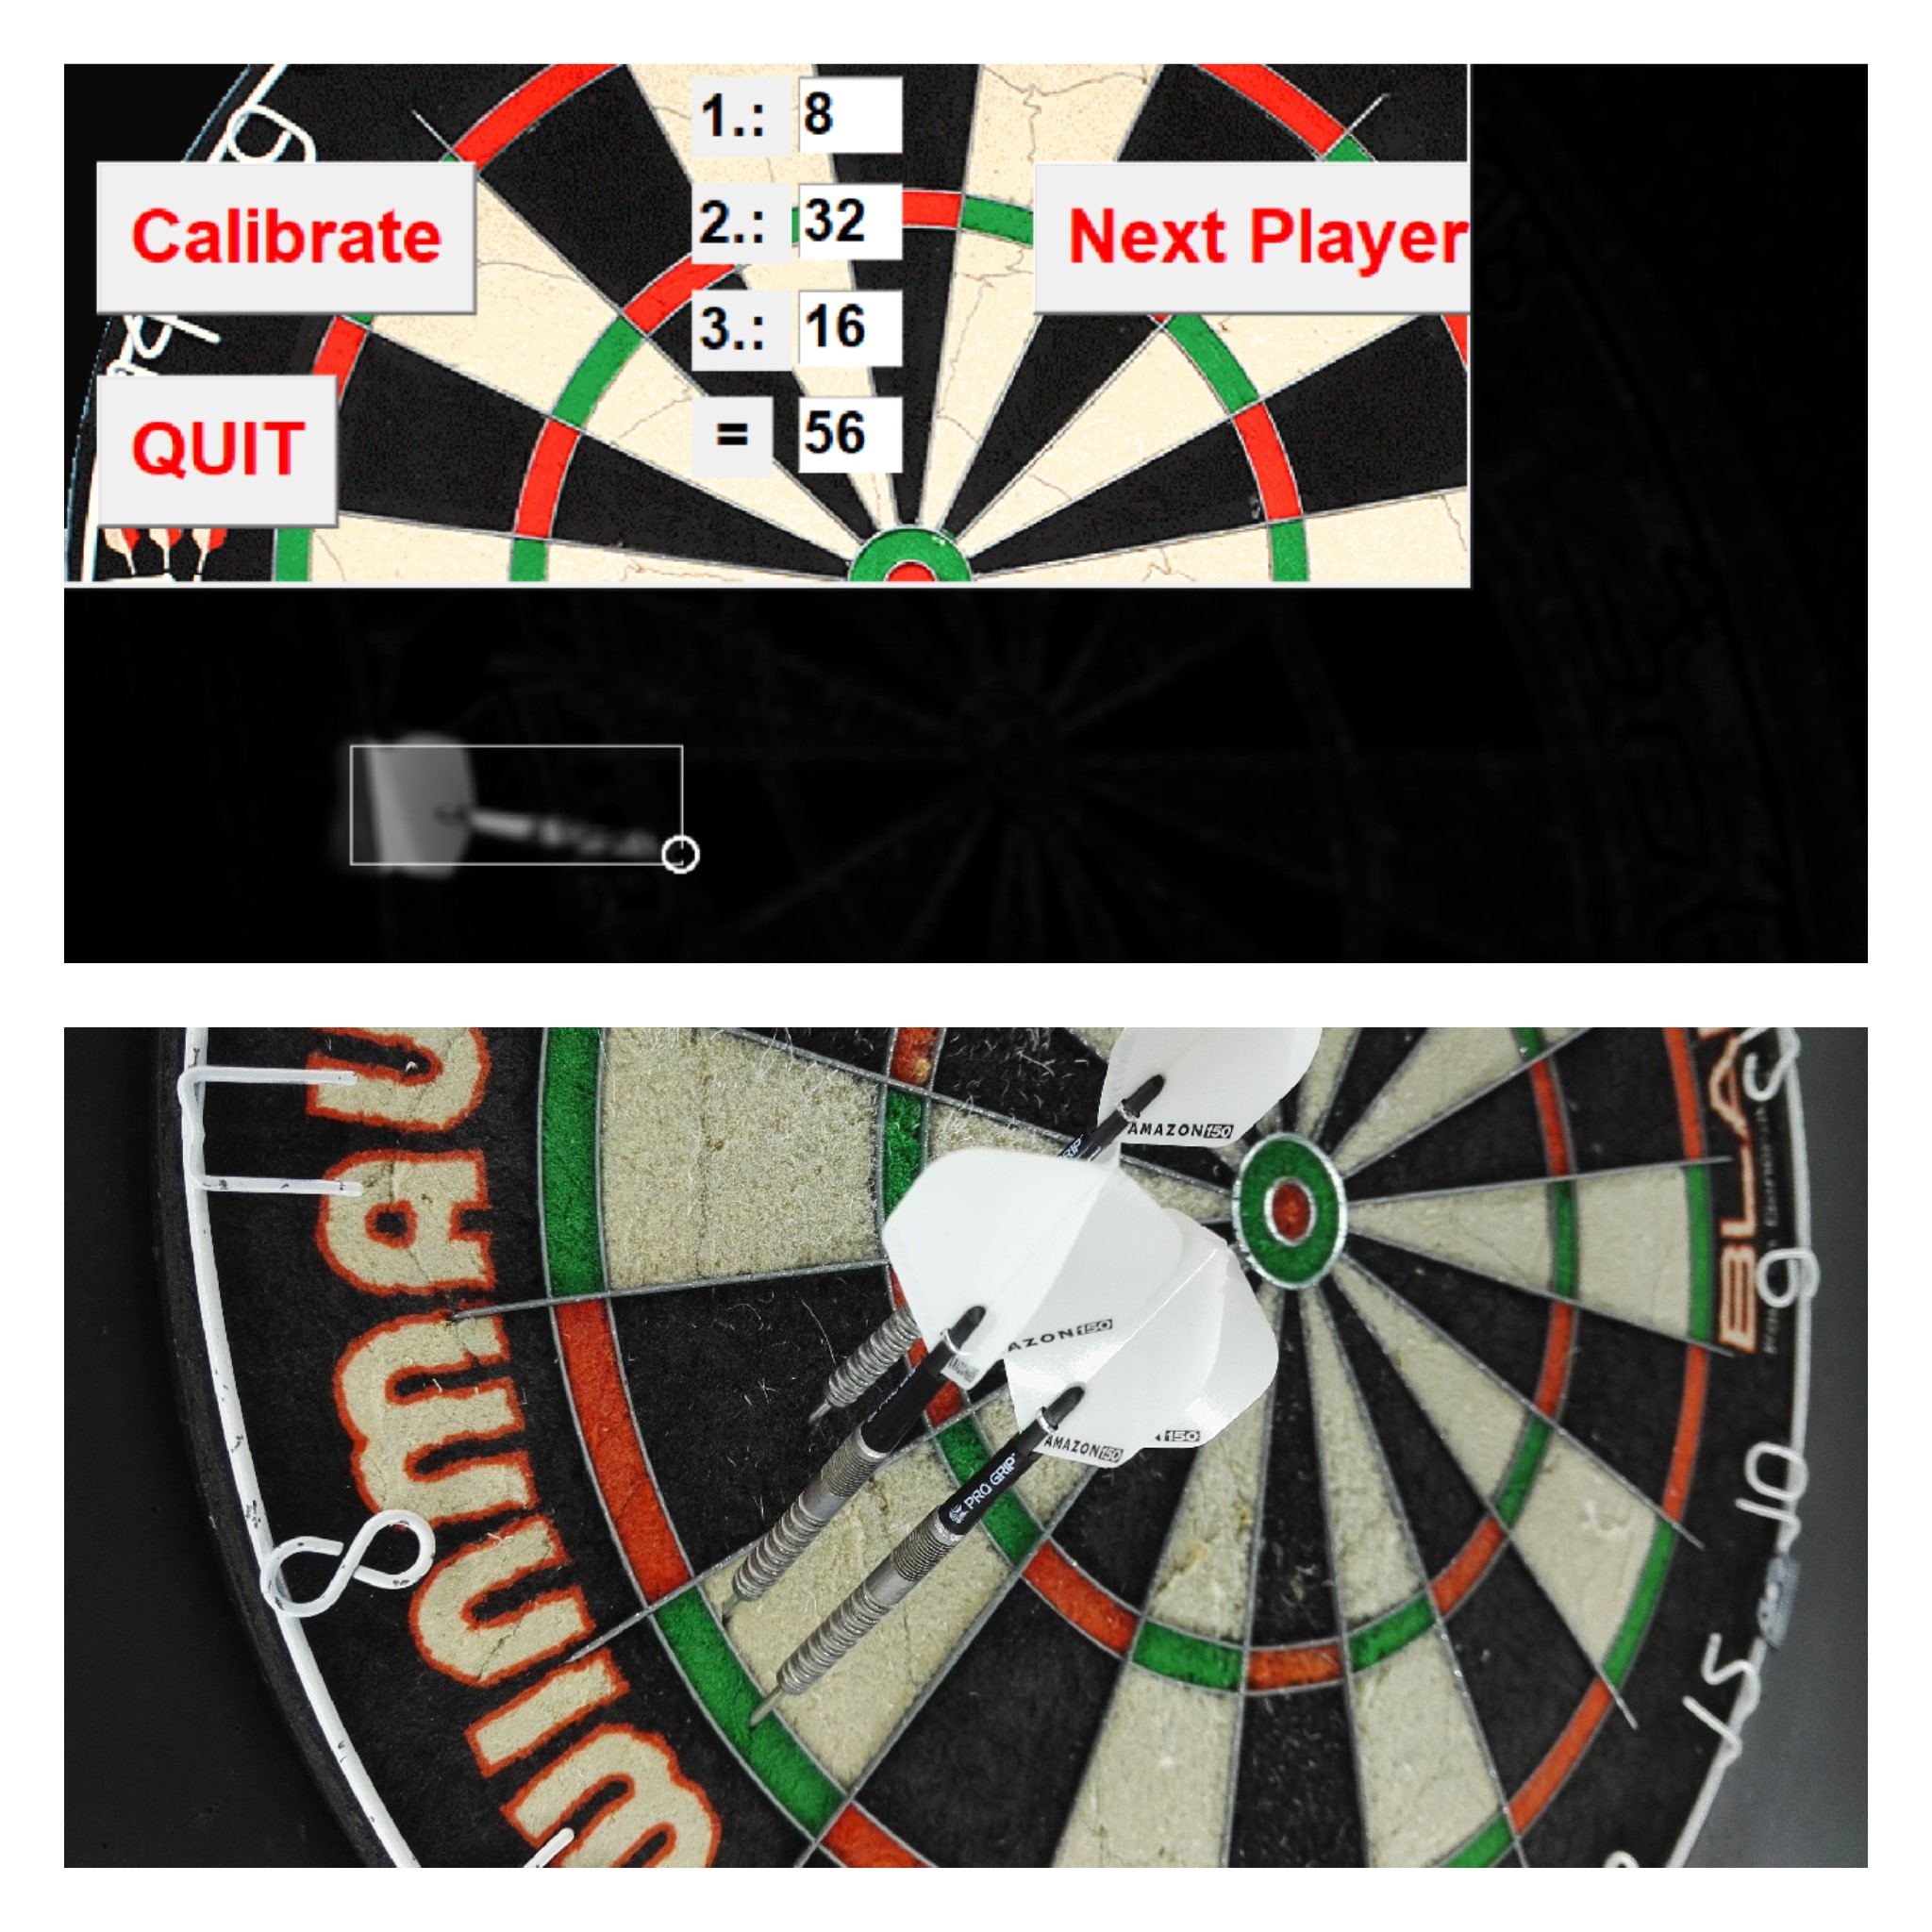 opencv-steel-darts Automatic scoring system for steel darts using OpenCV, a Raspberry Pi 3 Model B and two webcams.